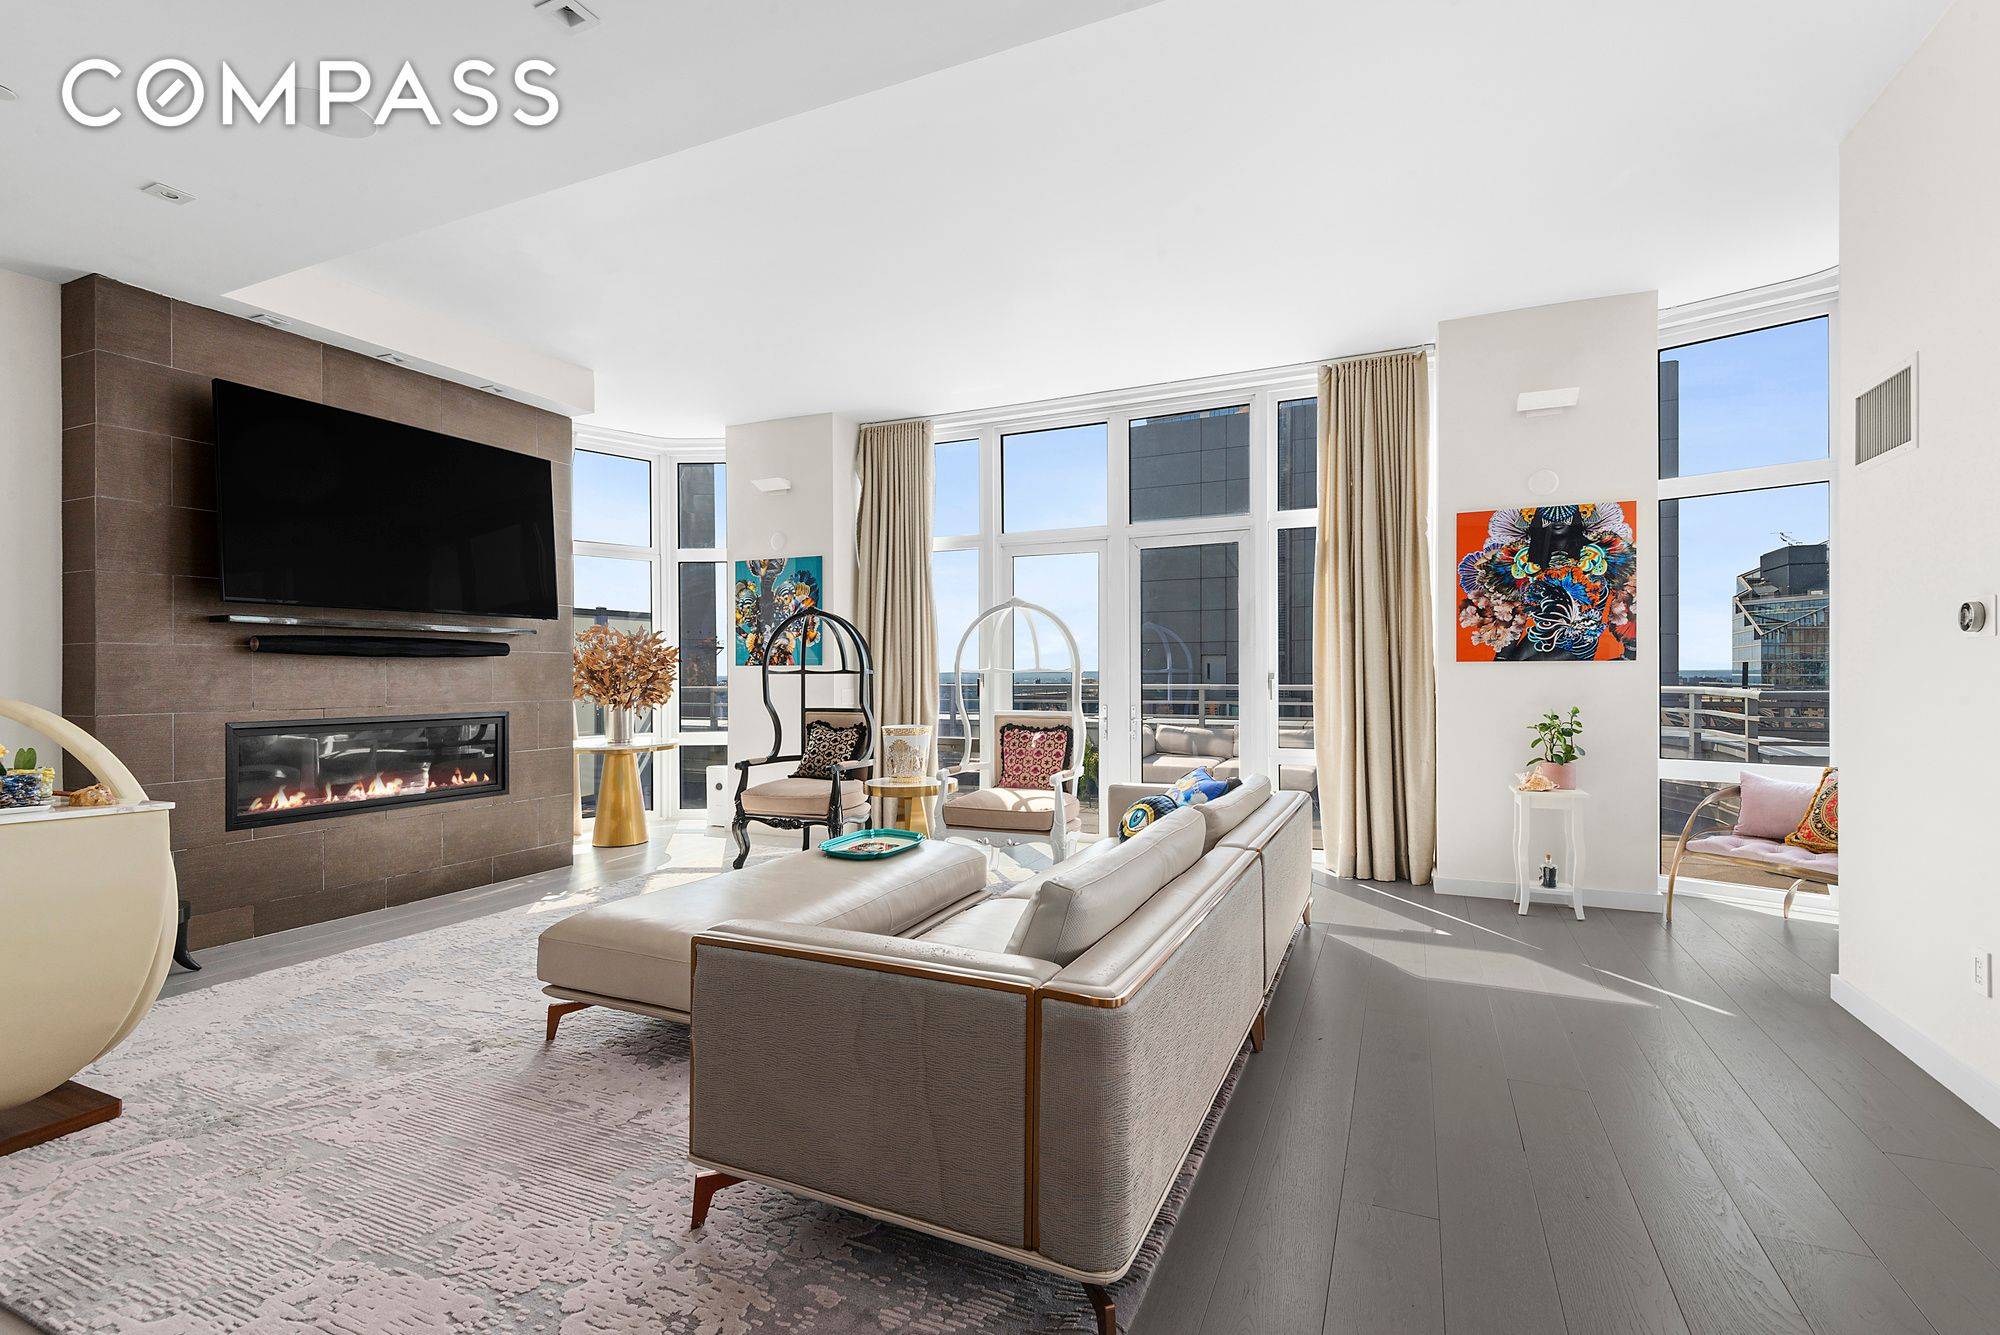 Lavish Lincoln Center living awaits in this exceptional and fully furnished three bedroom, three bathroom penthouse featuring flawless interiors, jaw dropping panoramic views and a vast wraparound terrace high atop ...